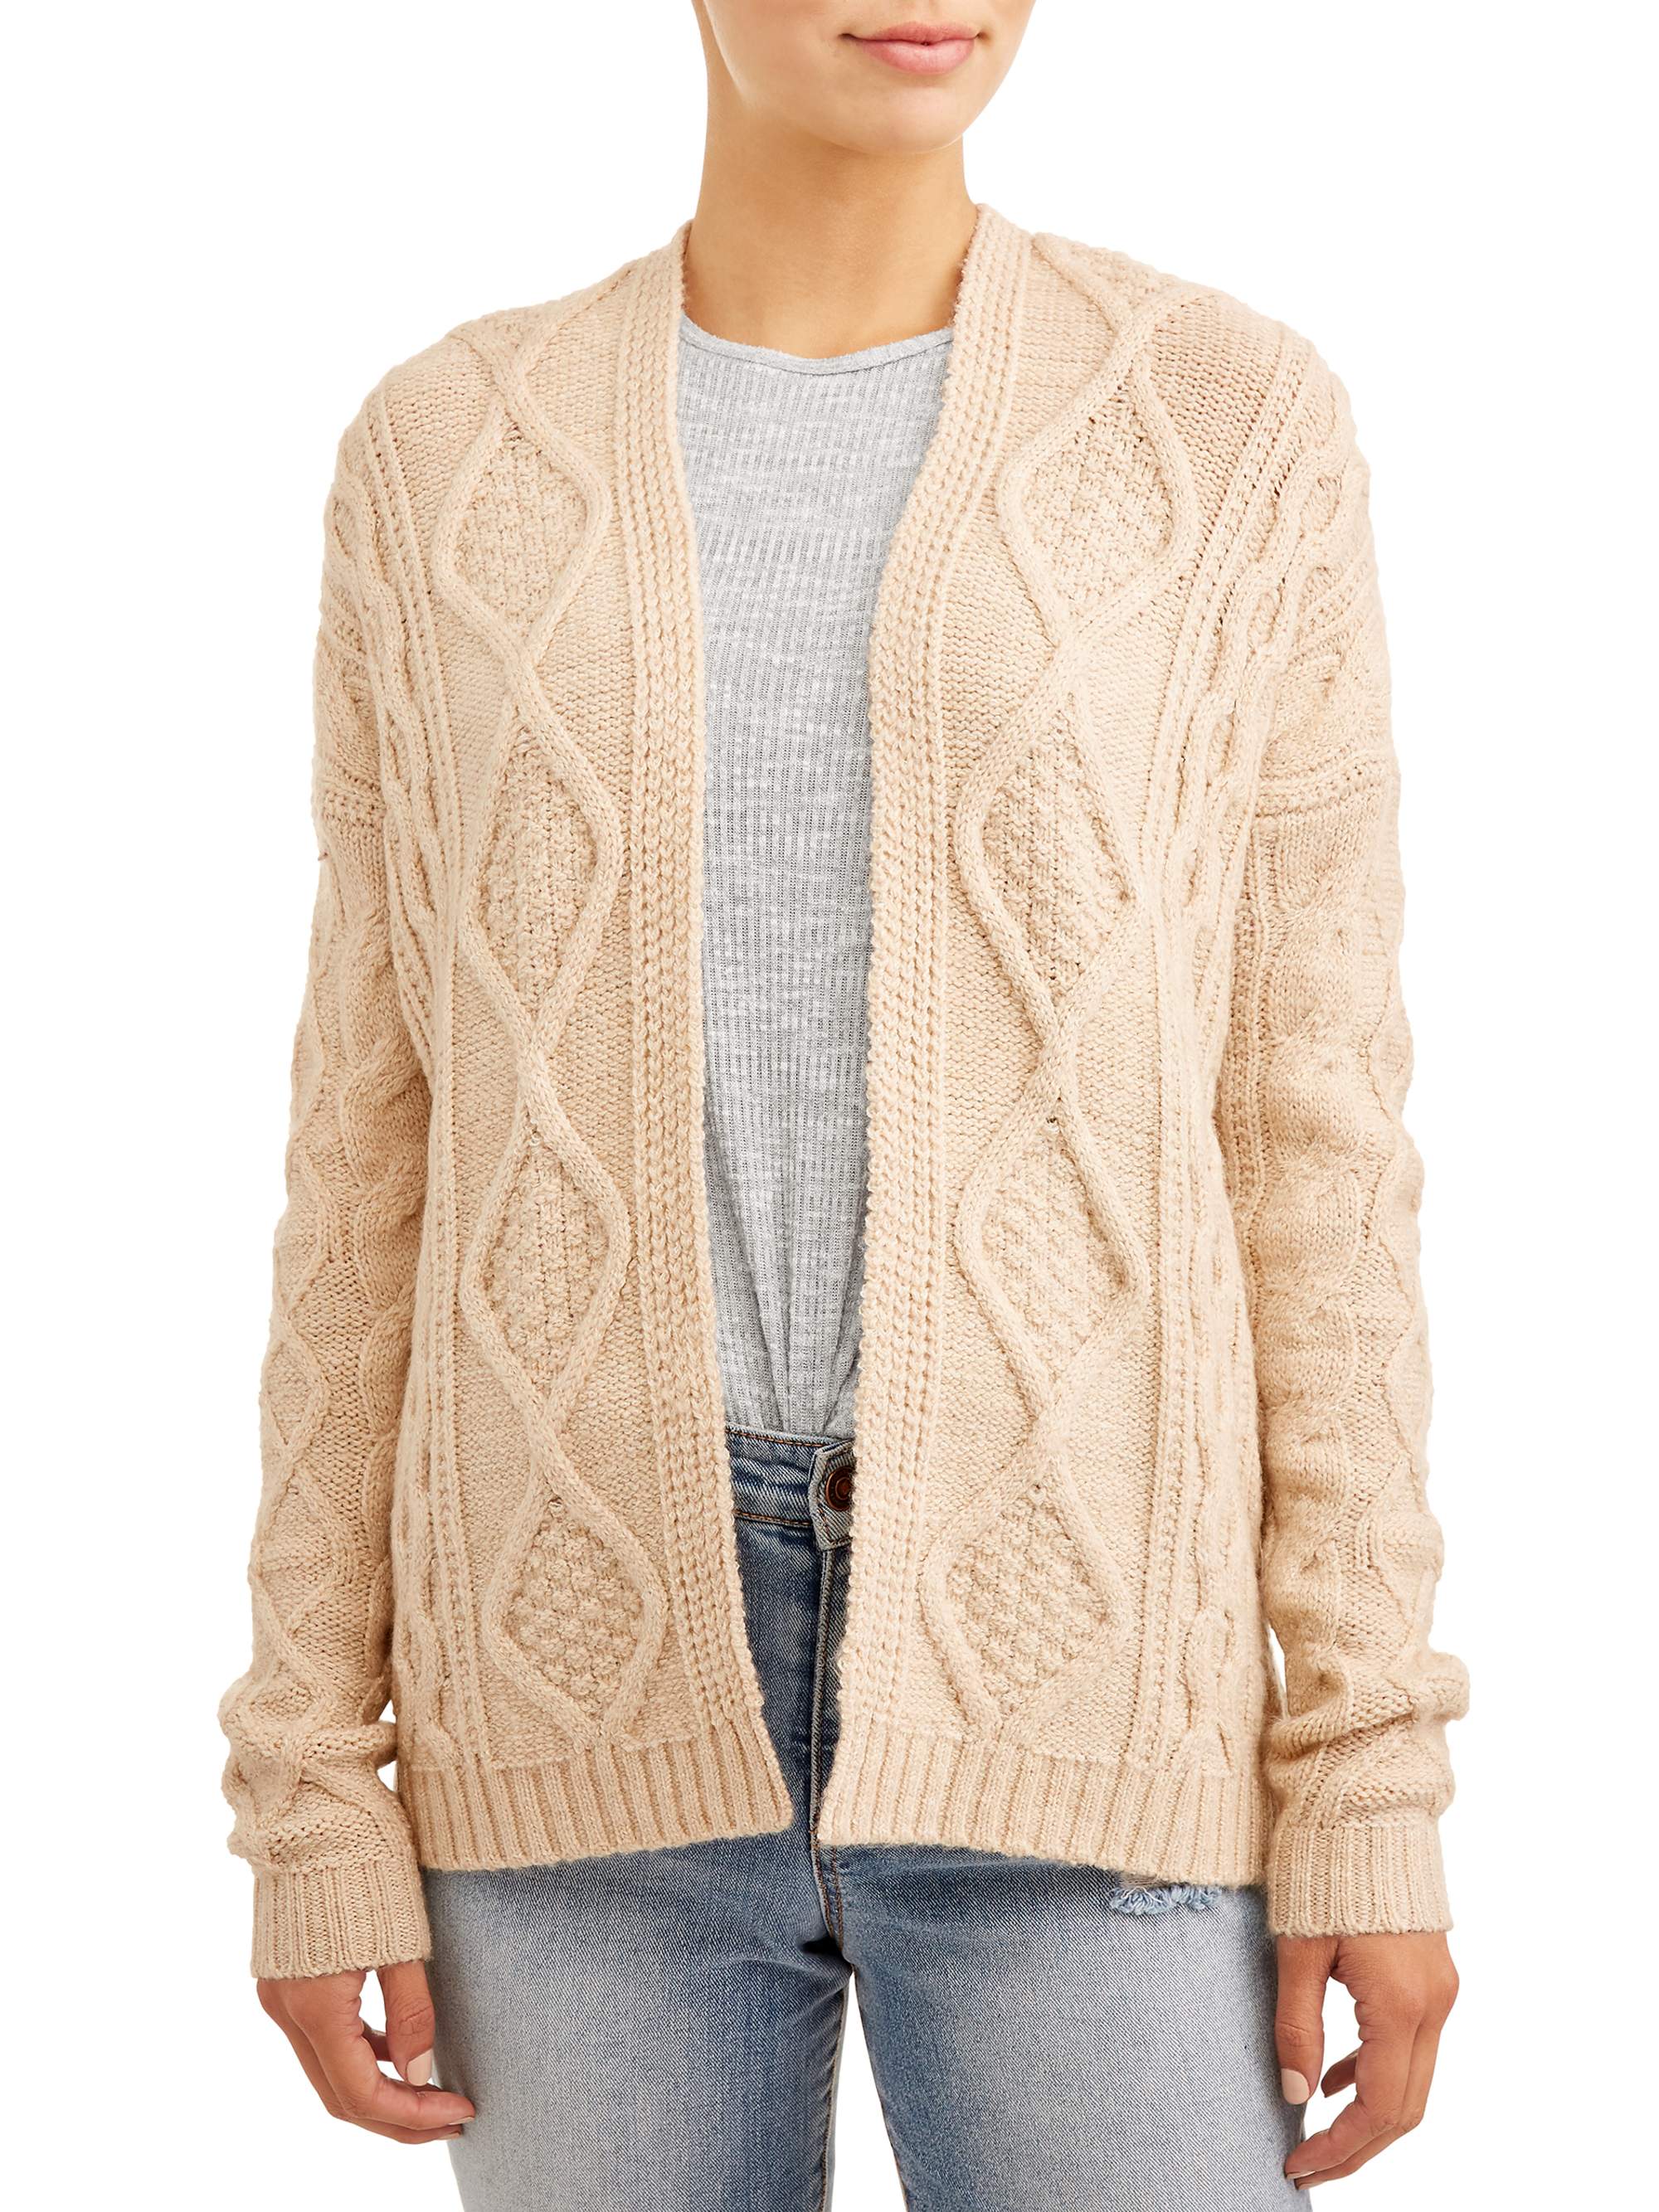 Time and Tru Women's Cableknit Open Cardigan - image 1 of 3